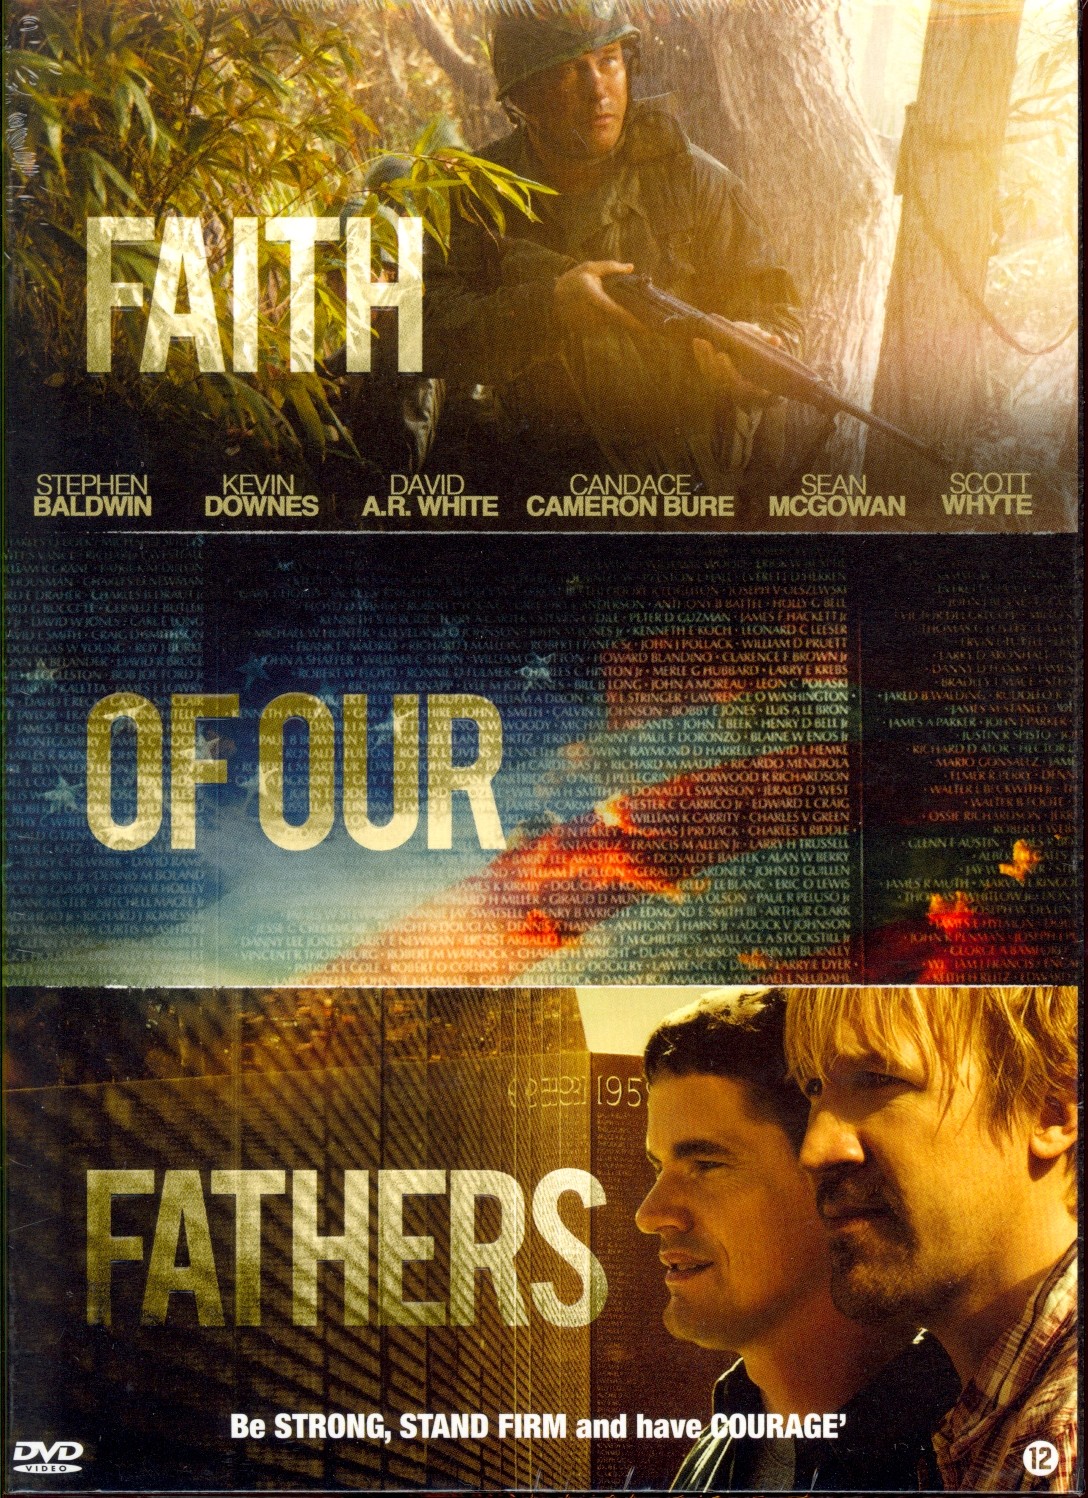 Faith Of Our Fathers